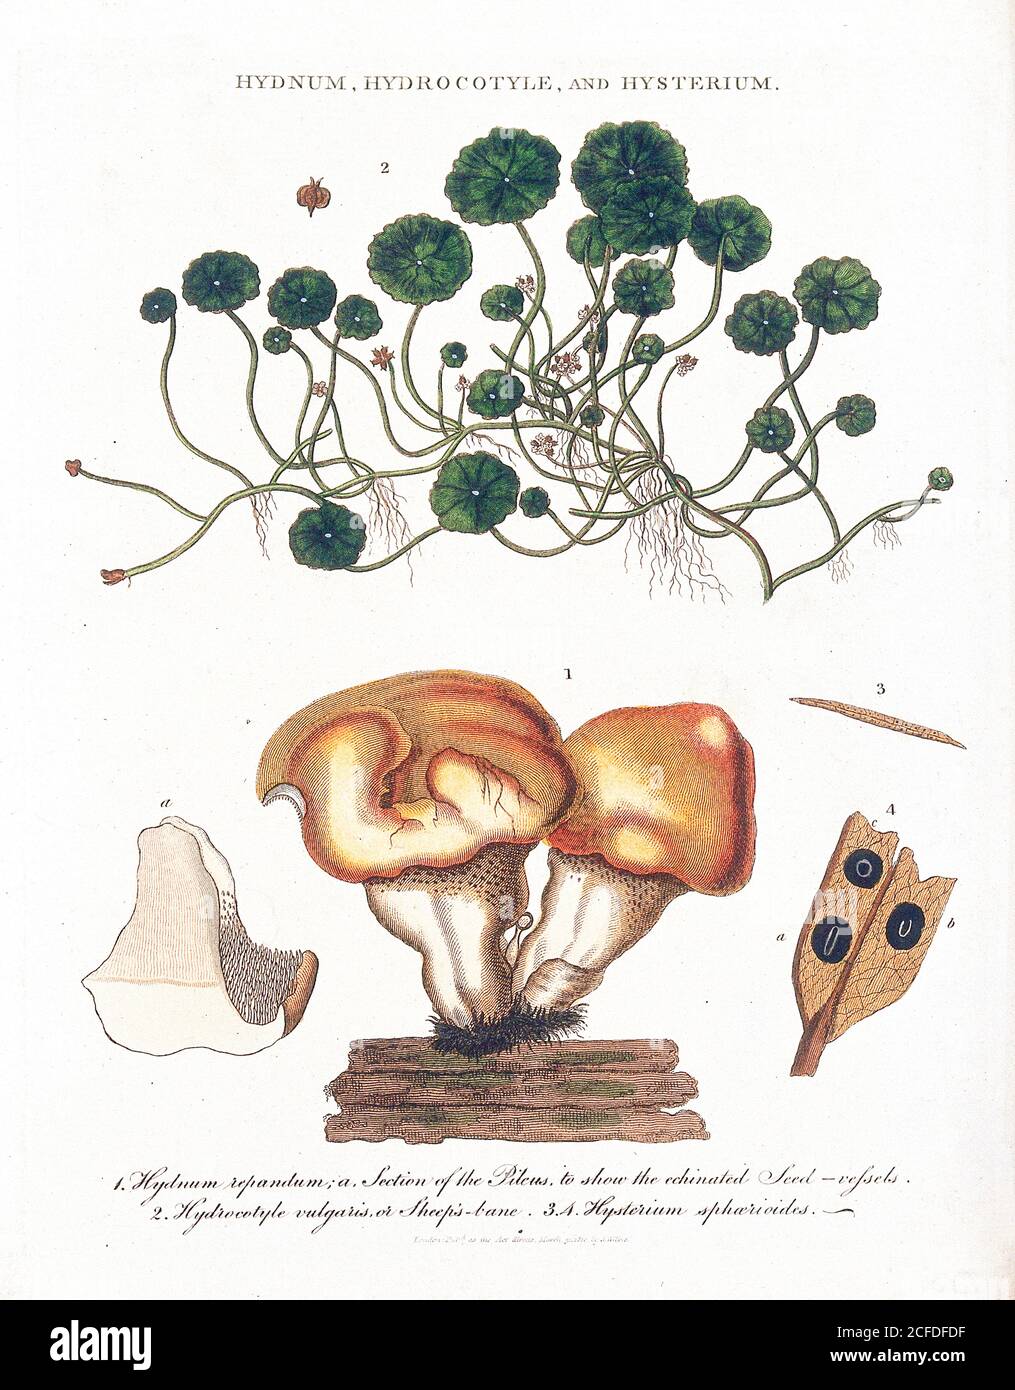 Hydnum [Fungi], Hydrocotyle [water pennywort] and Hysterium Coloured Copperplate engraving From the Encyclopaedia Londinensis or, Universal dictionary of arts, sciences, and literature; Volume X;  Edited by Wilkes, John. Published in London in 1811 Stock Photo